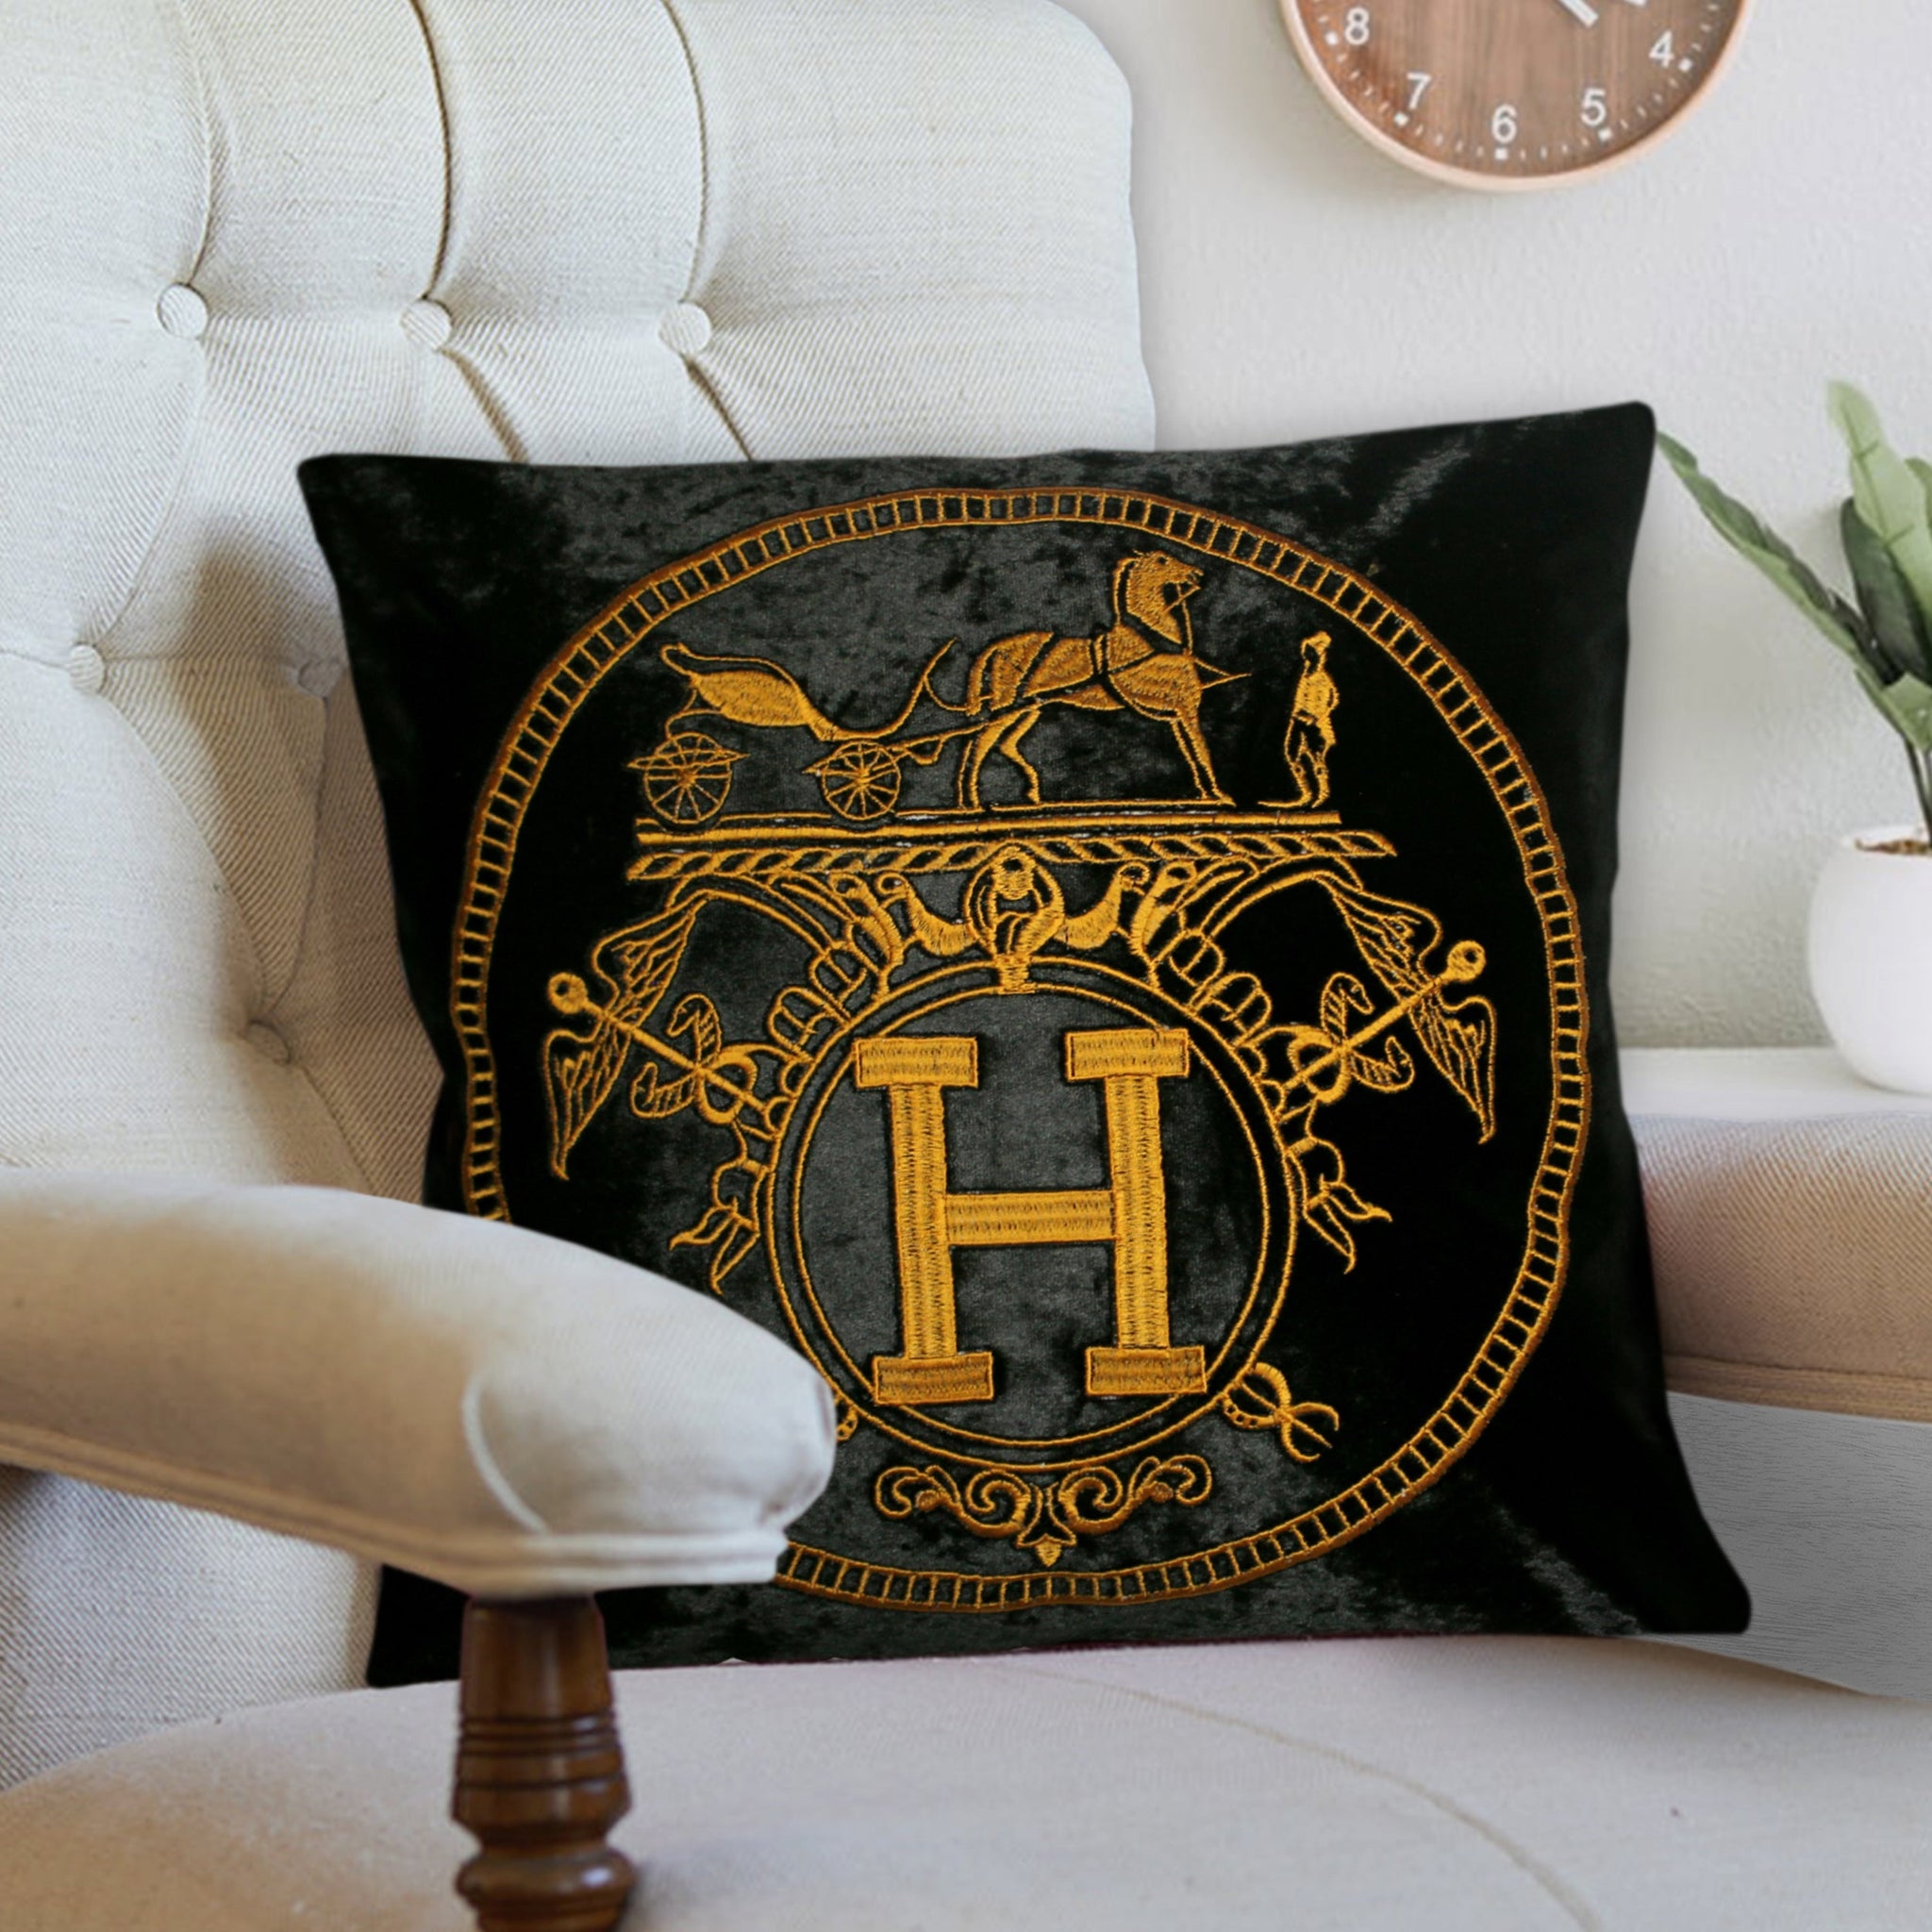 Pillow Cover Velvet Decorative Embroidery Cushion Cover Baroque Style Pillow Case for Sofa Chair Bedroom Living Room 45x45 cm 18x18 Inches